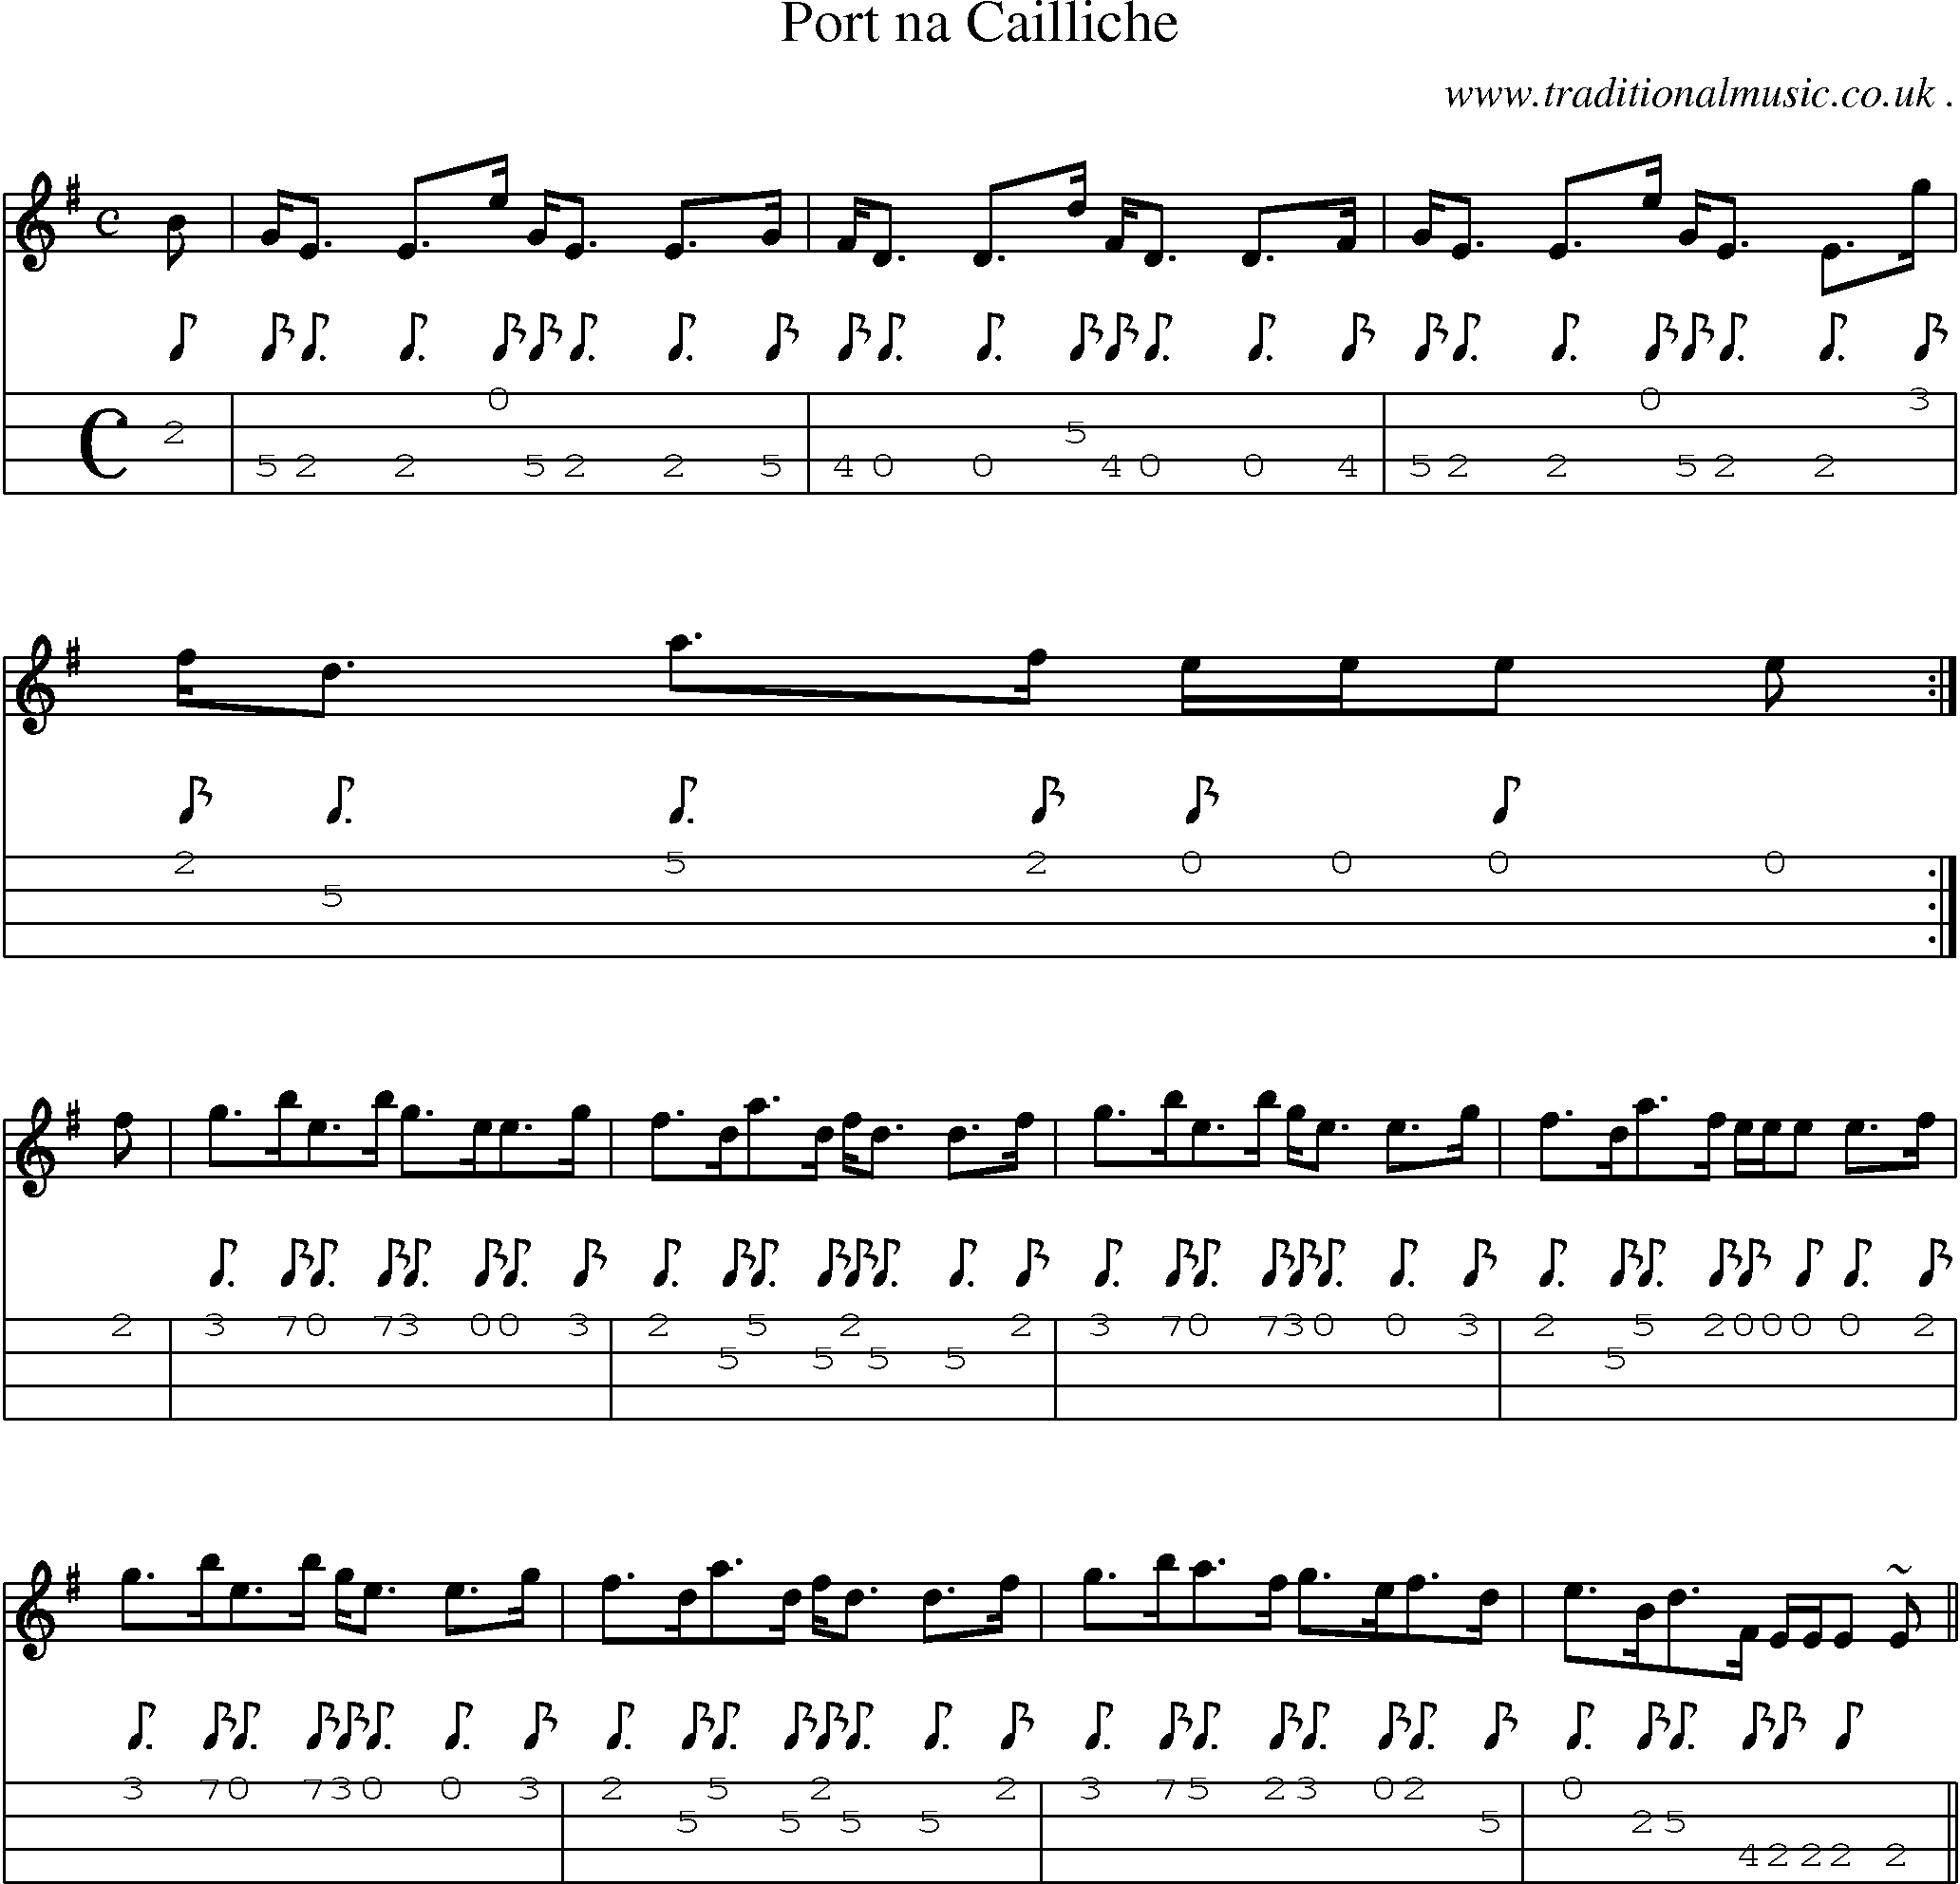 Sheet-music  score, Chords and Mandolin Tabs for Port Na Cailliche